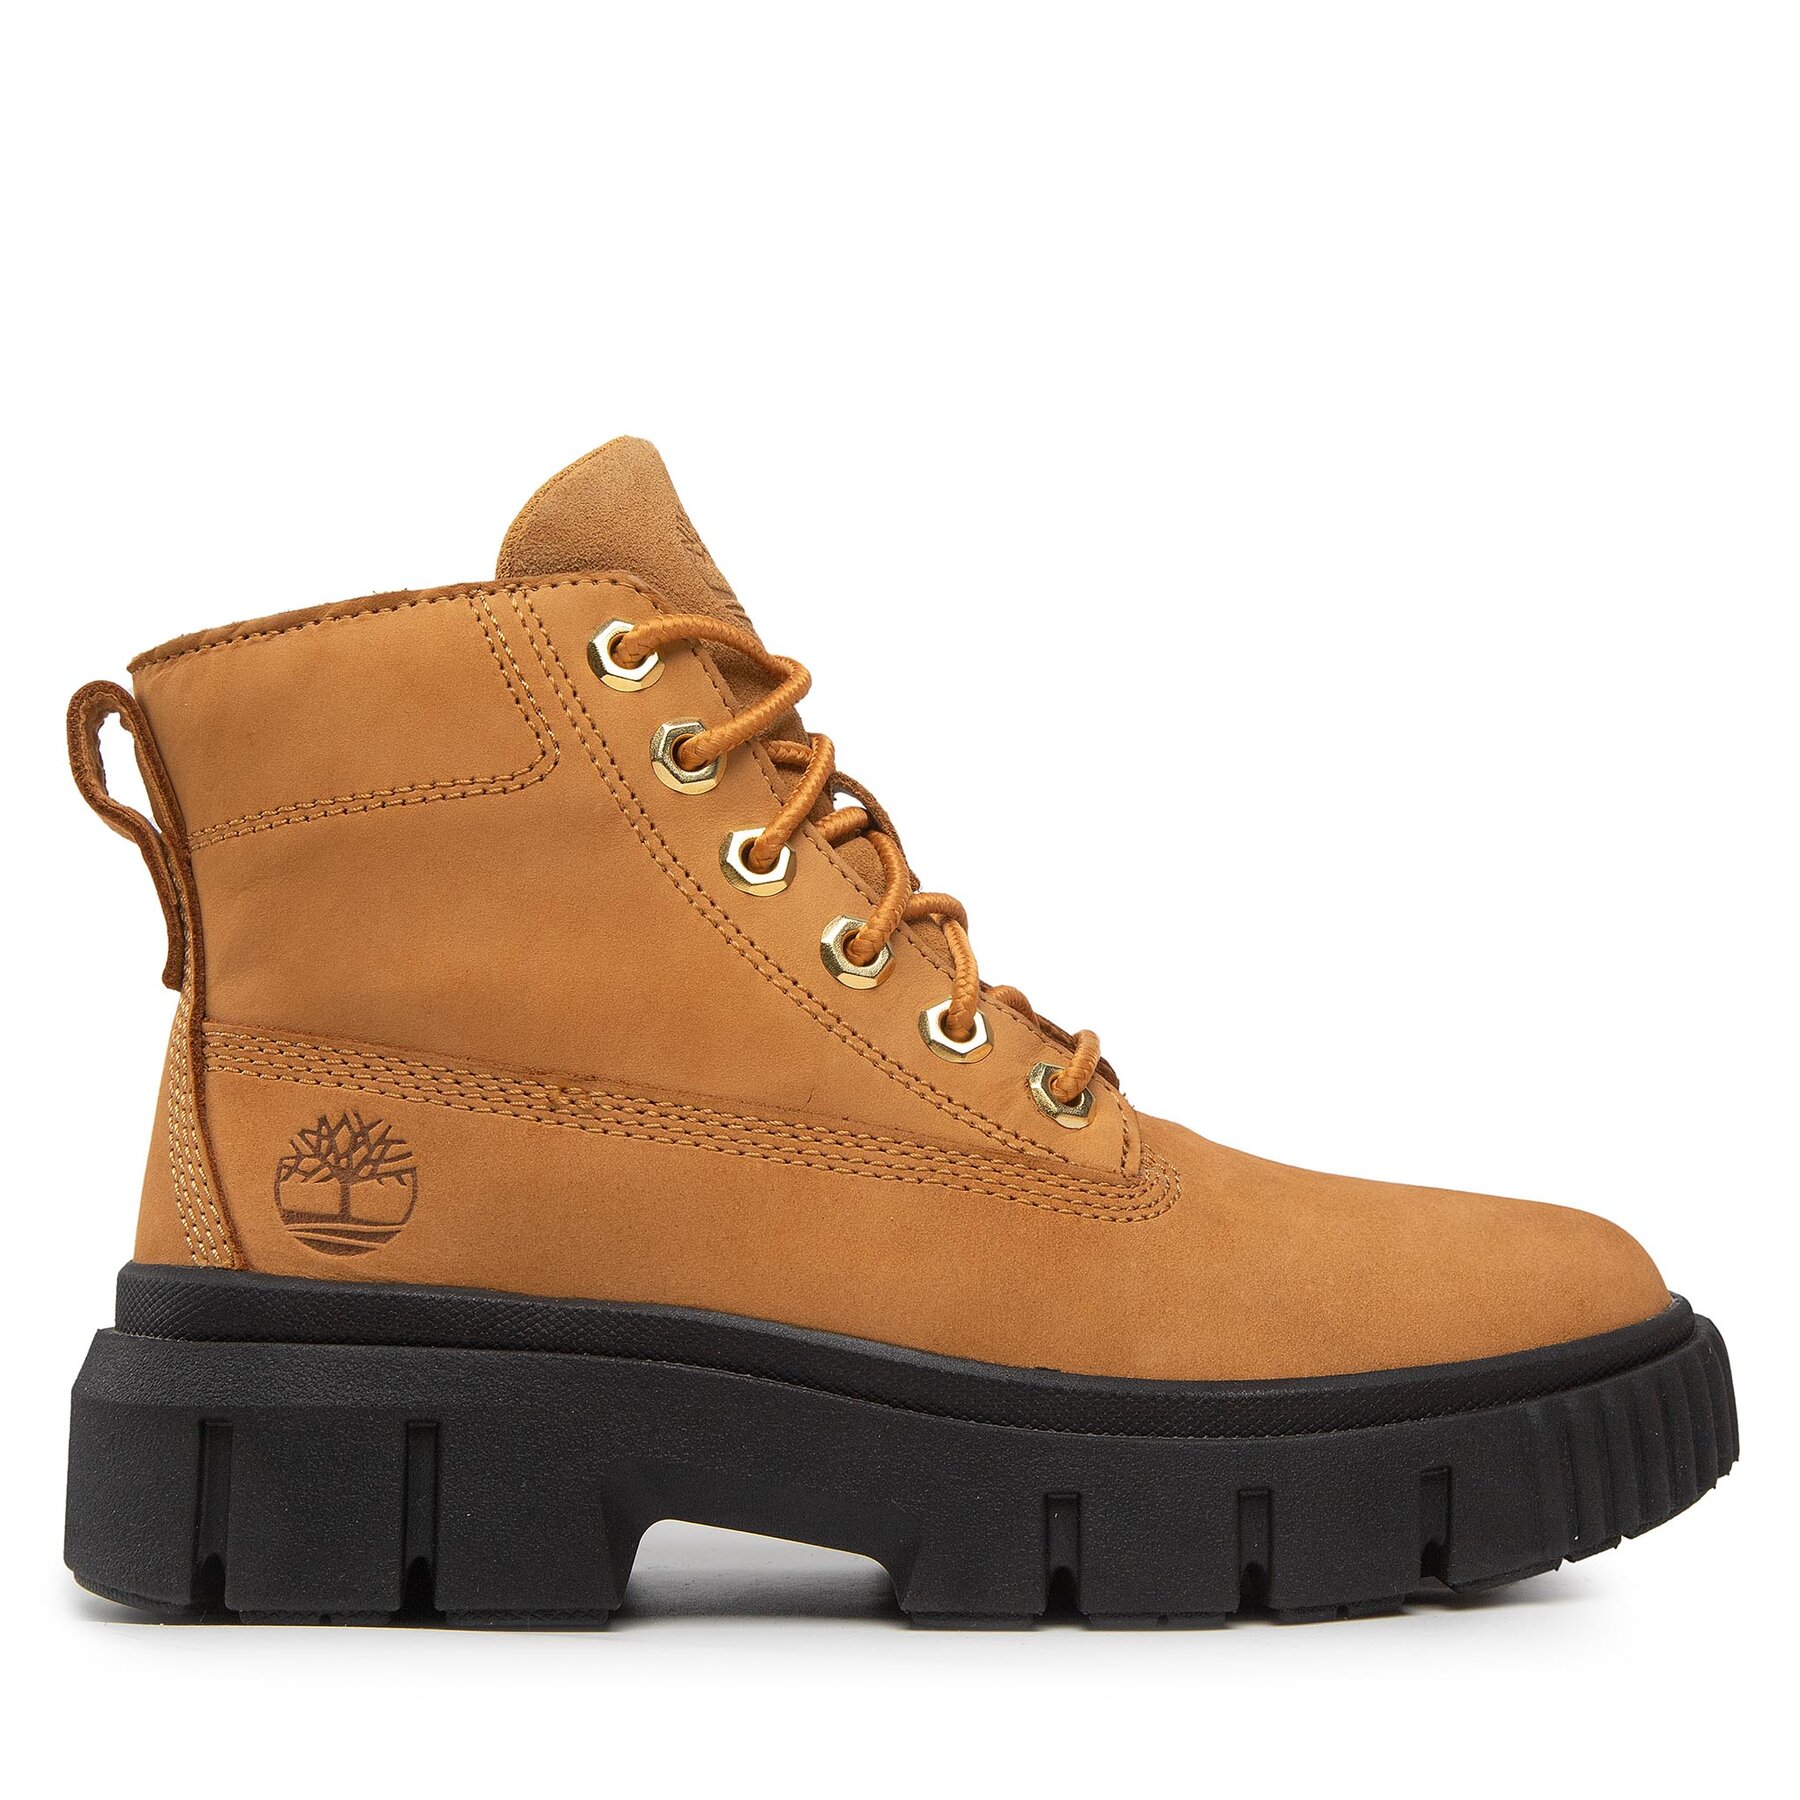 Stiefeletten Timberland Greyfield Leather Boot TB0A5RP4231 Wheat Nubuck von Timberland